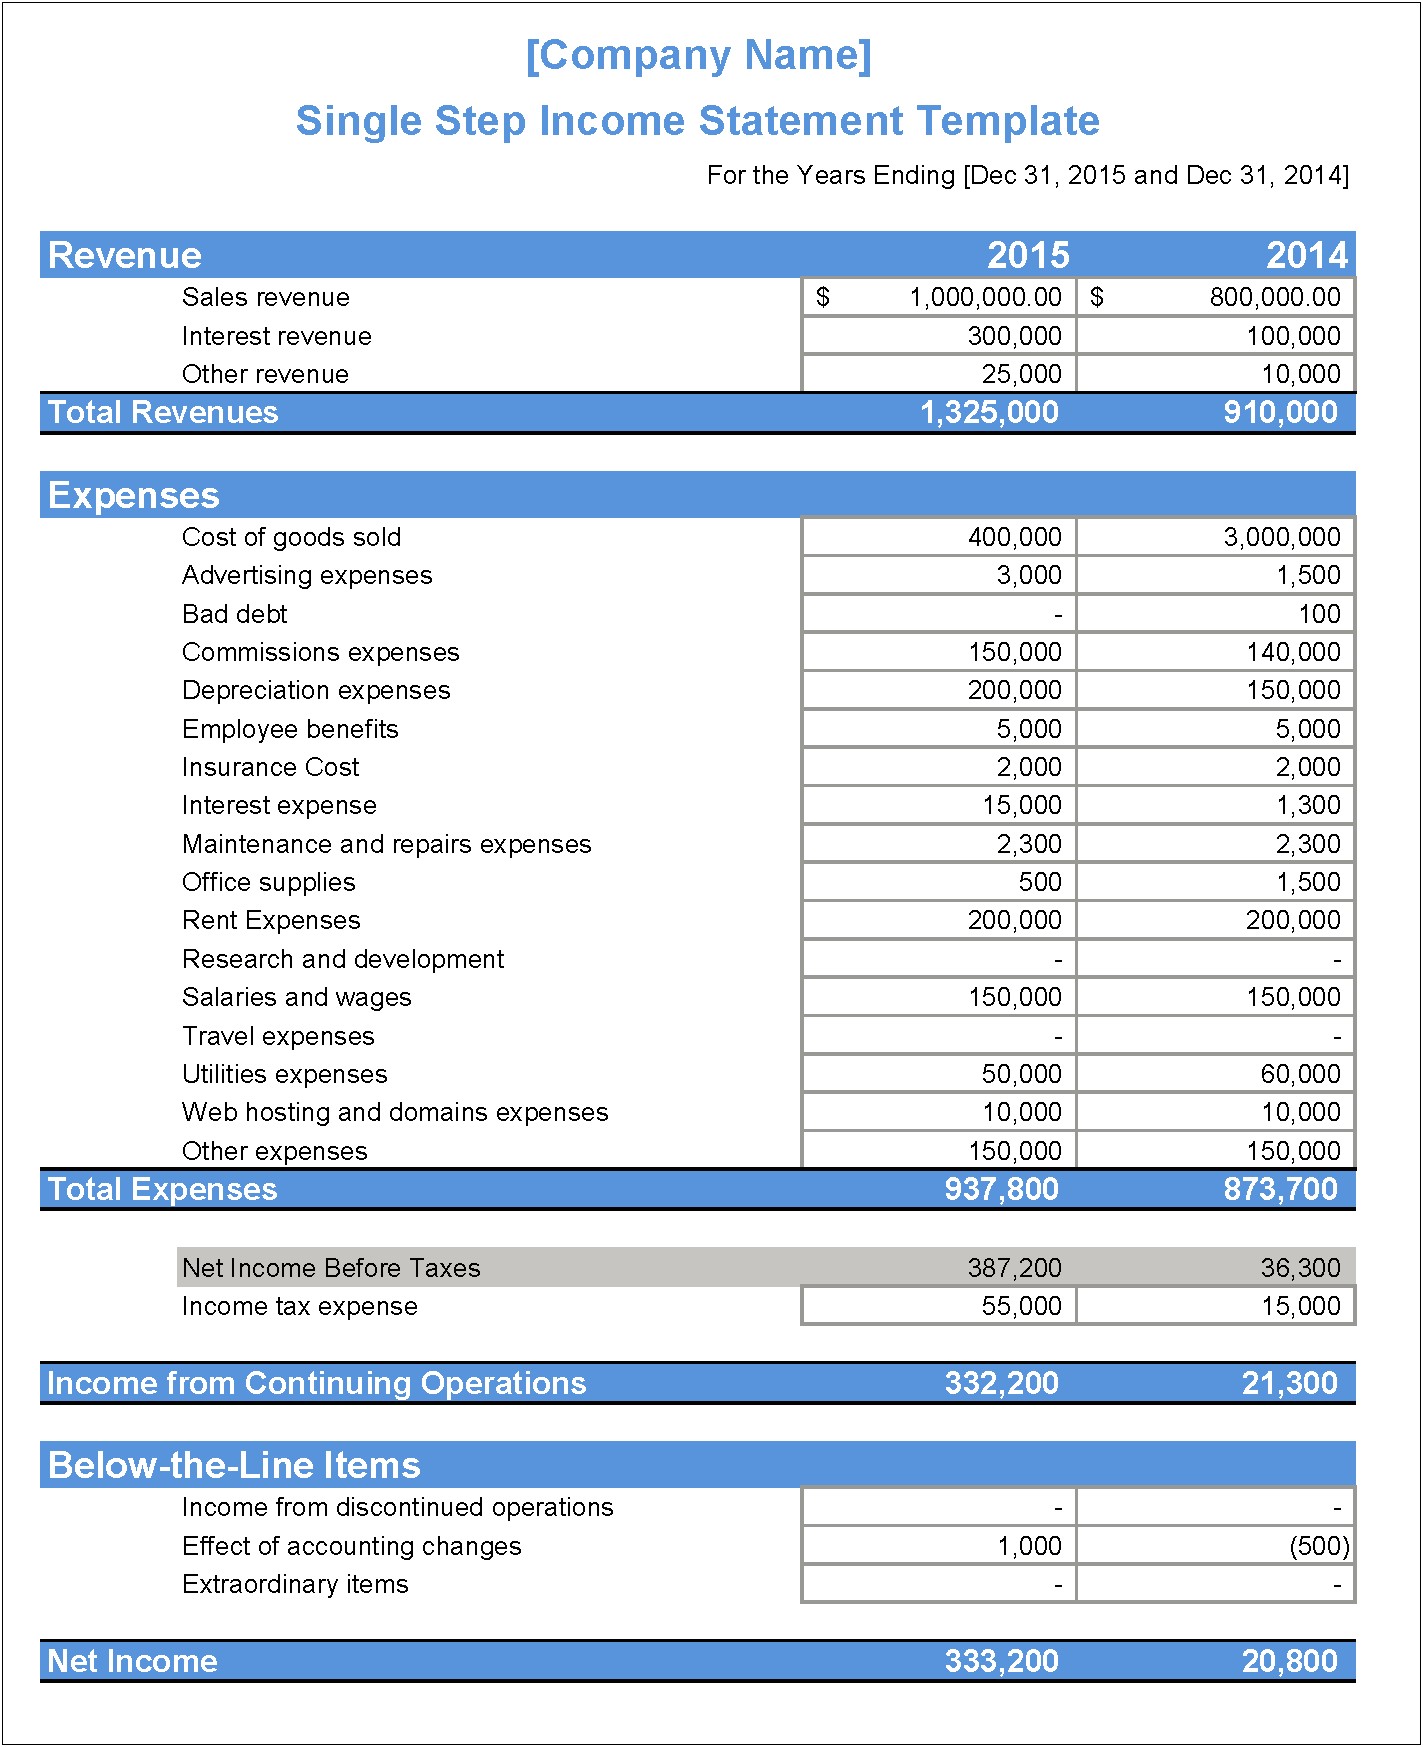 financial-statement-excel-template-free-download-templates-resume-designs-dljo8vy1v0